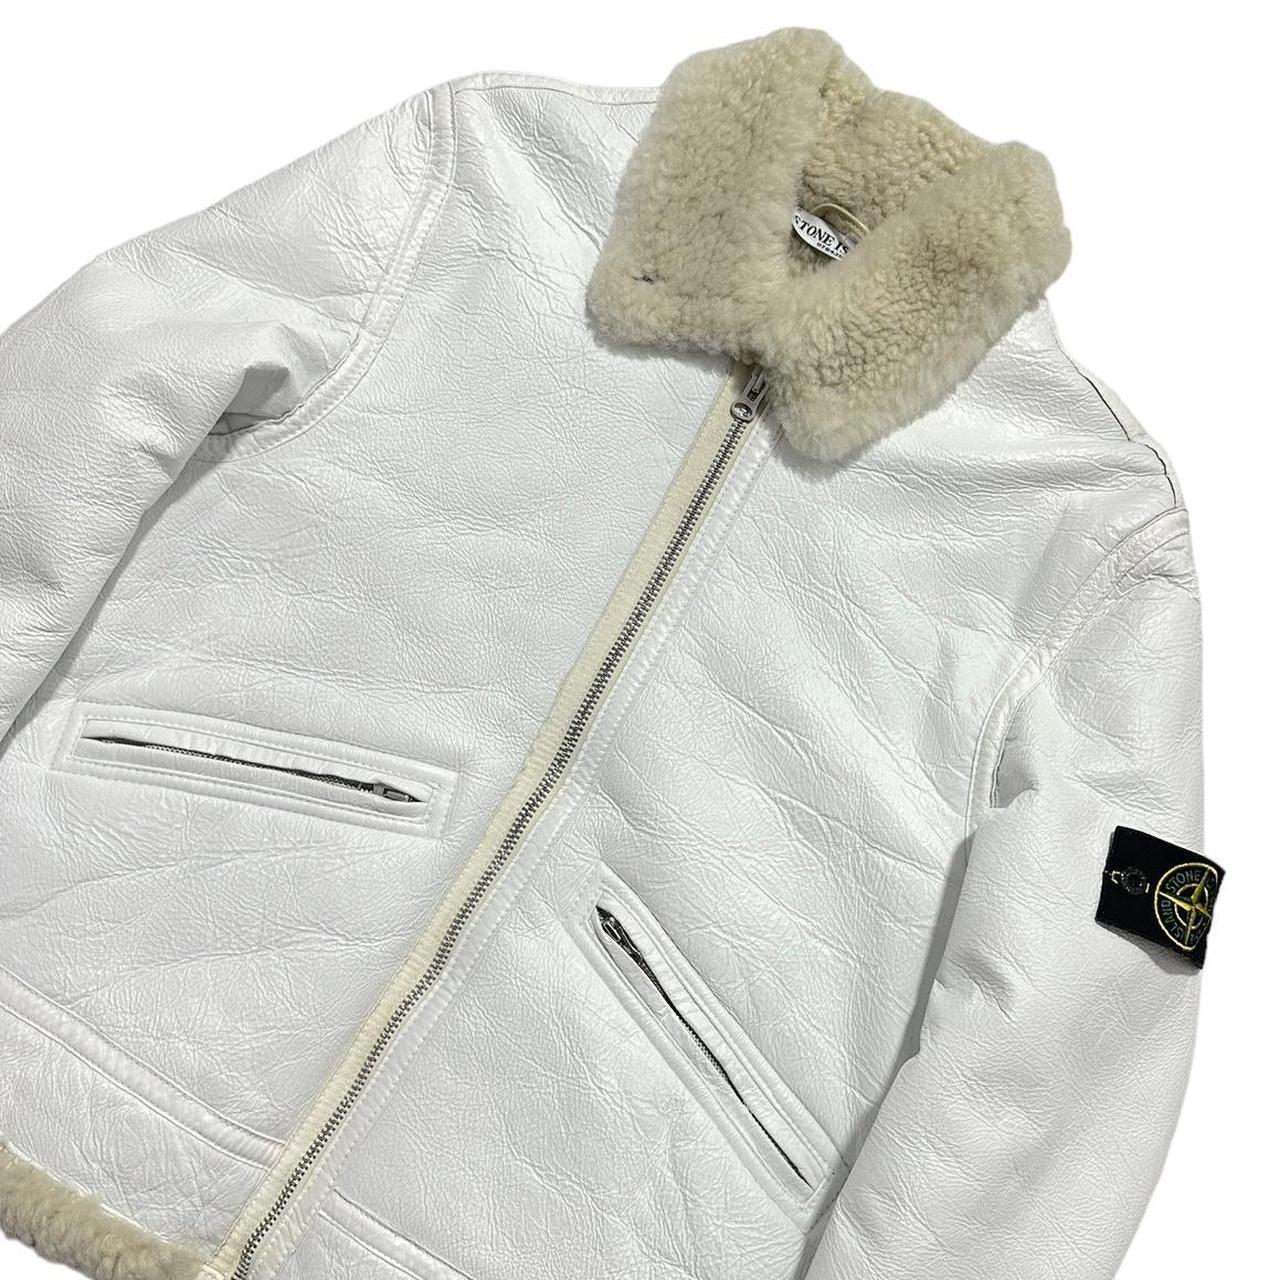 Stone Island Hand Painted Sheepskin Leather Jacket - Known Source